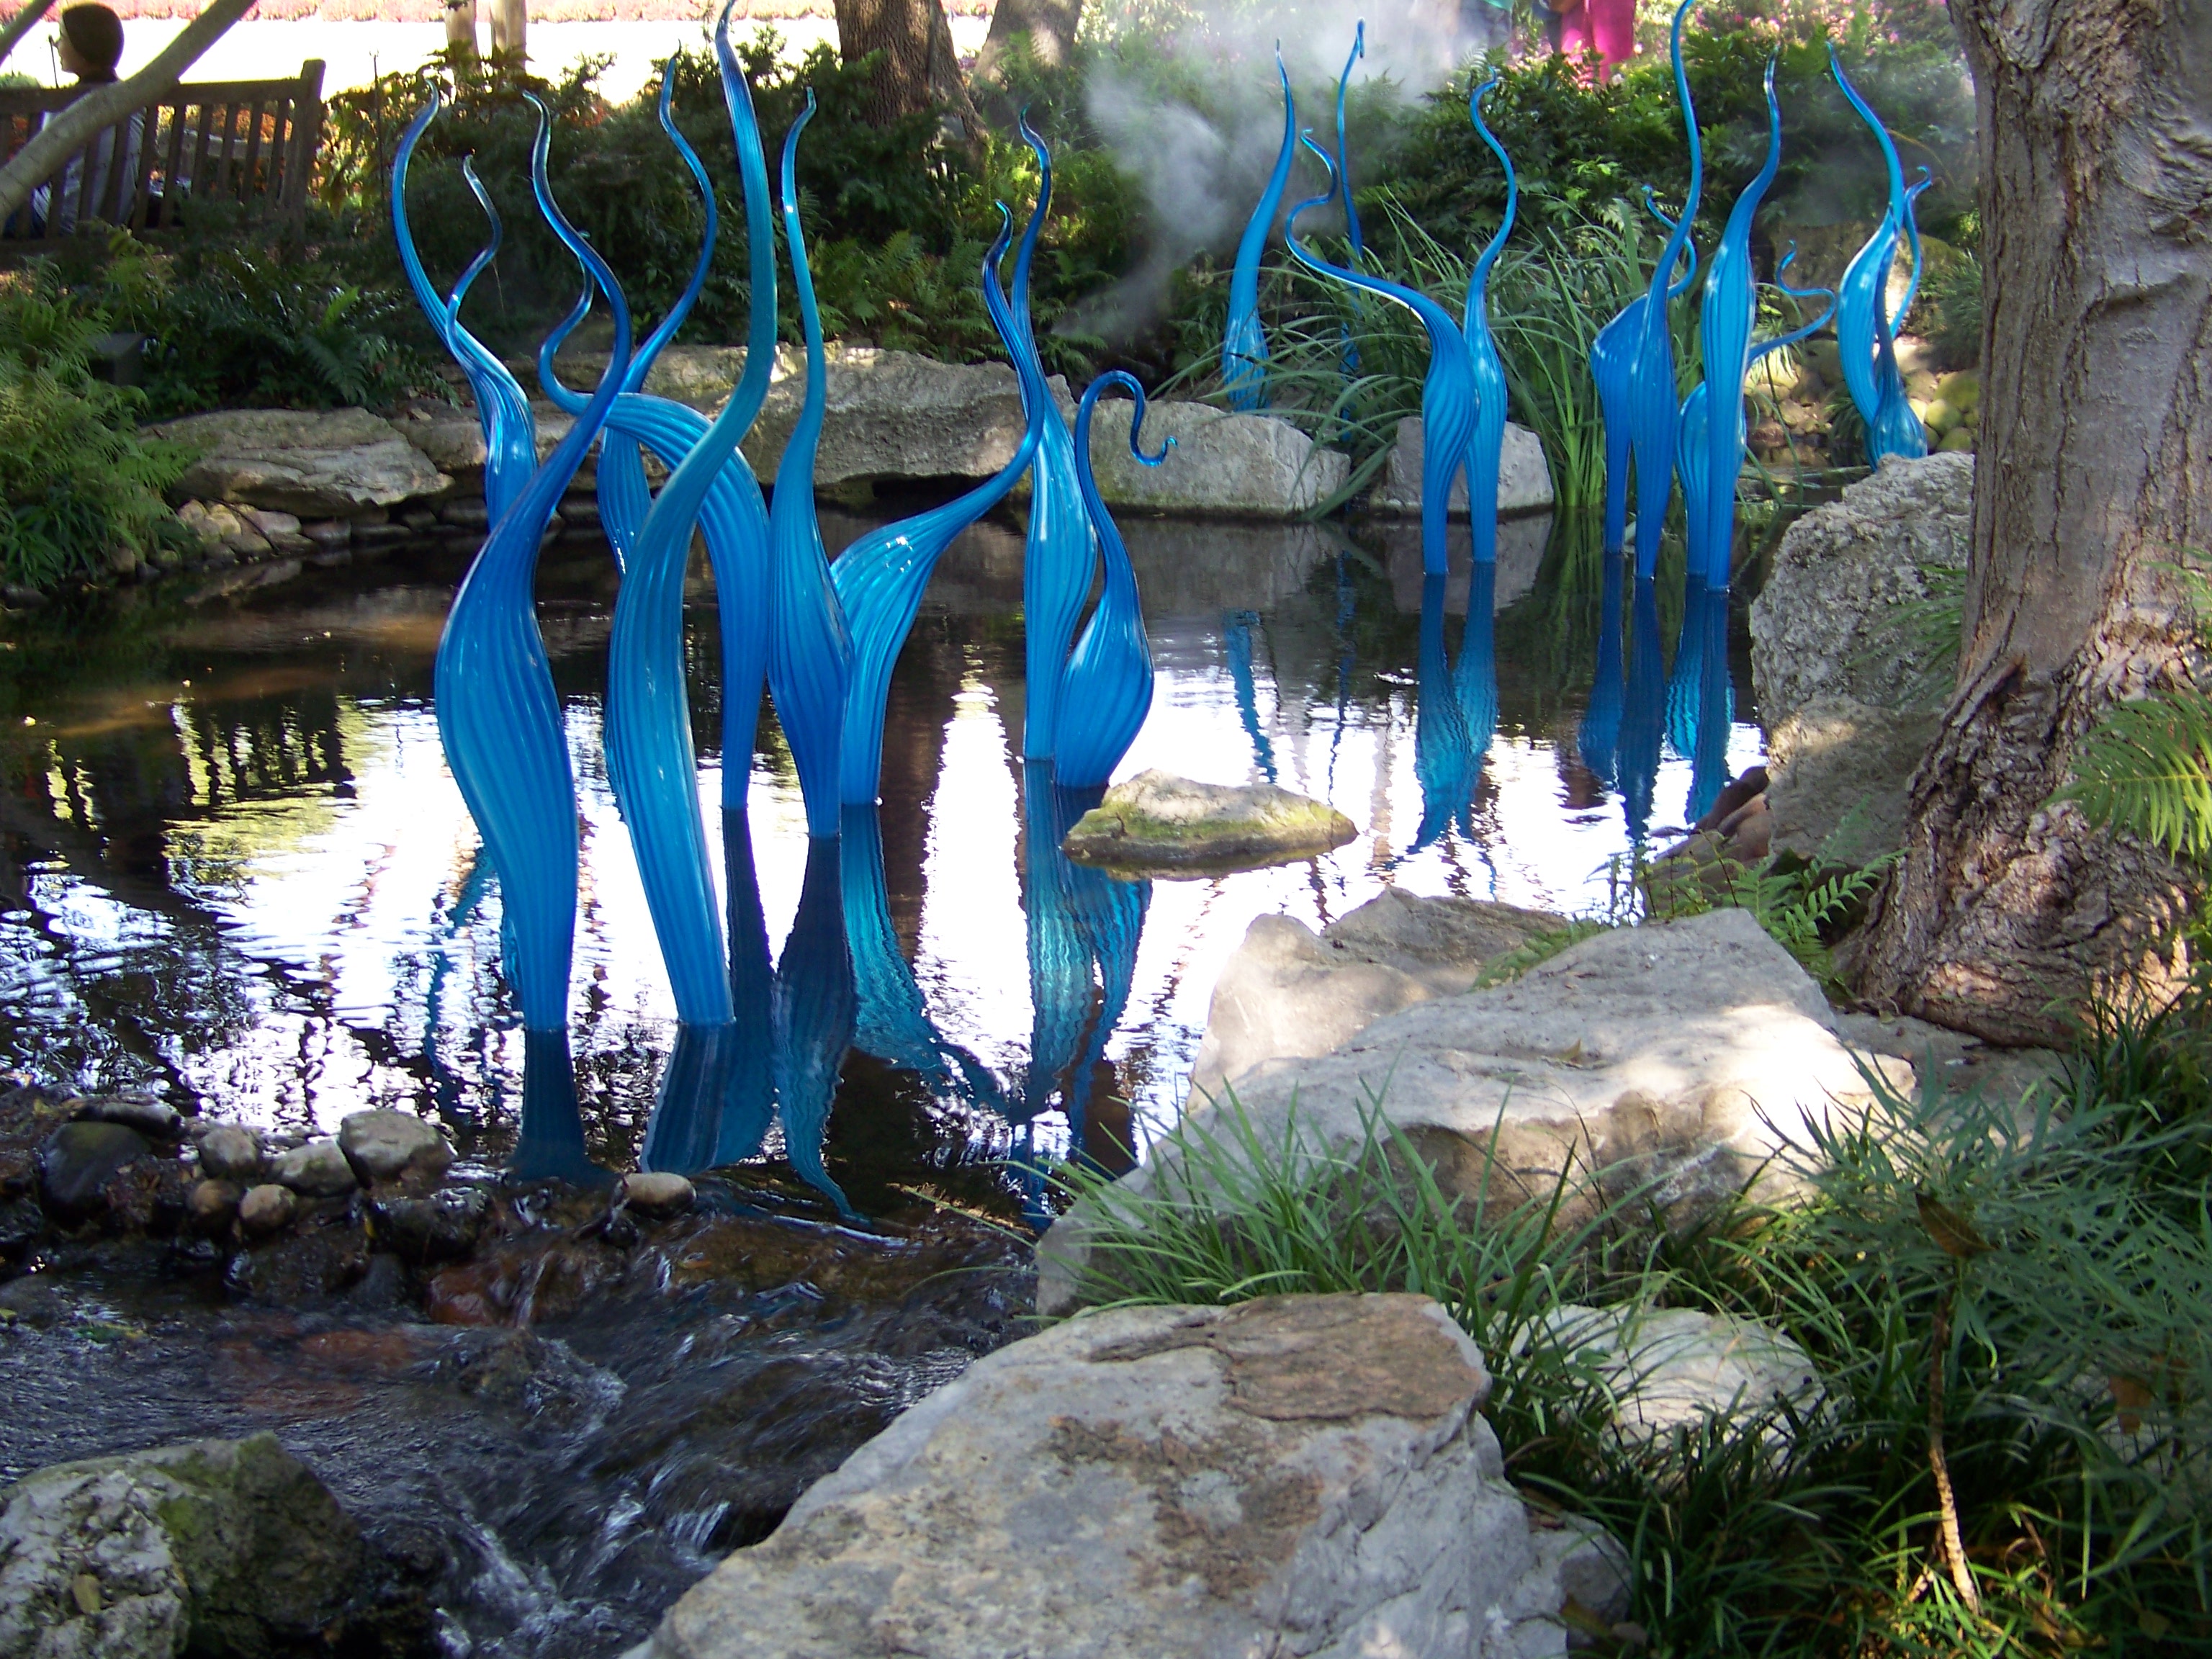 Dale Chihuly Chihuly at the Dallas Arboretum